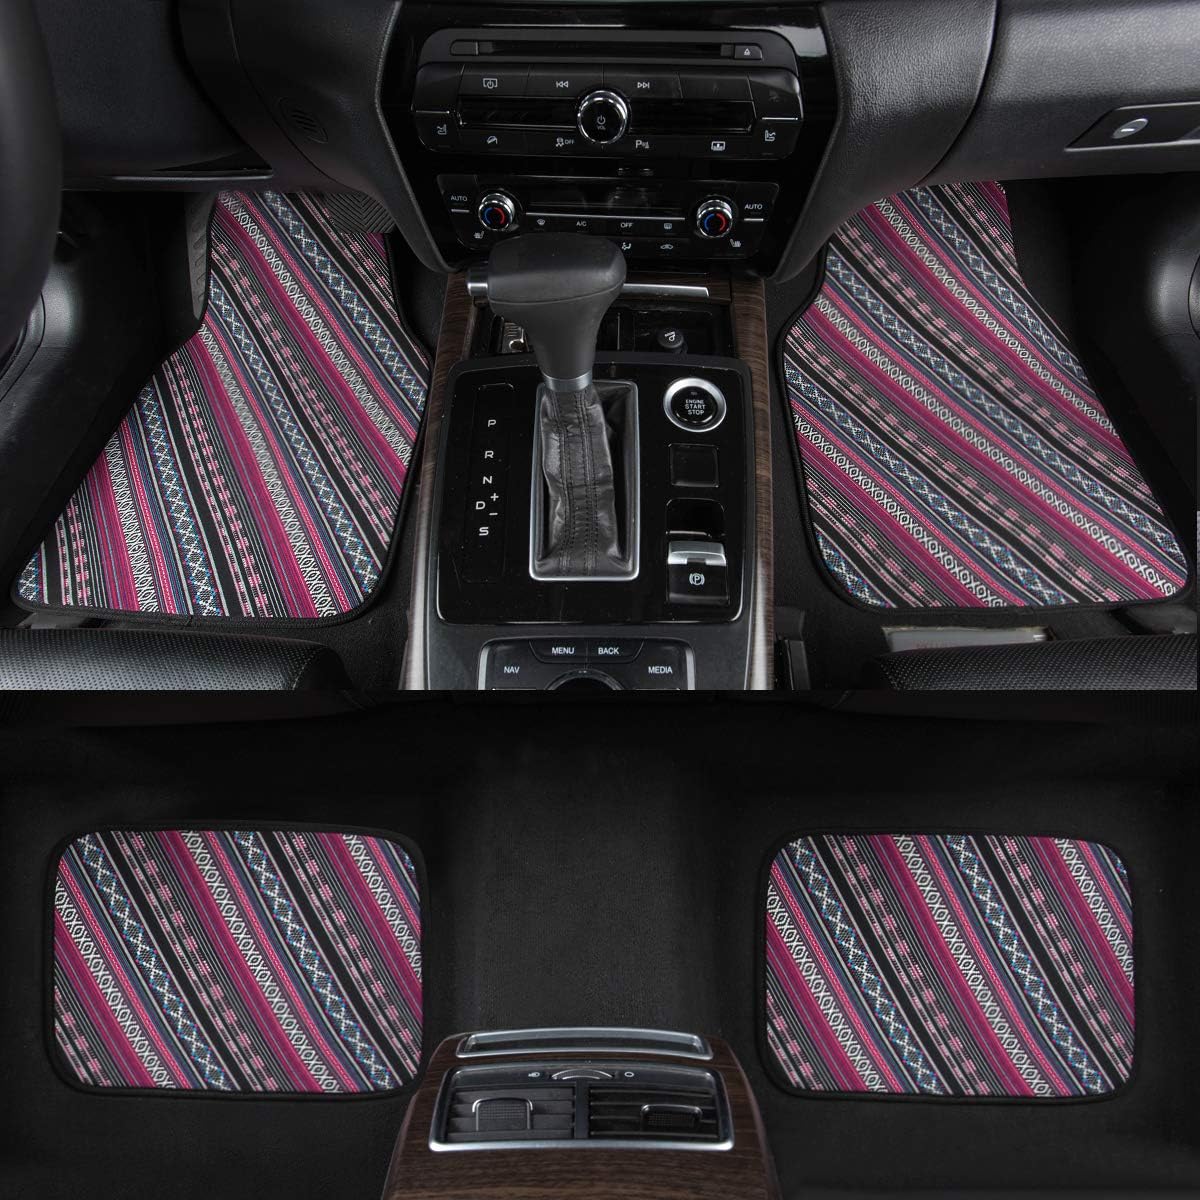 CAR PASS Ethnic Boho Bundle Car Floor Mats with Car Seat Covers Full Set, Universal Fit for Convertible Coupe Hatchback Pickup Sedan SUV Wagon Truck -